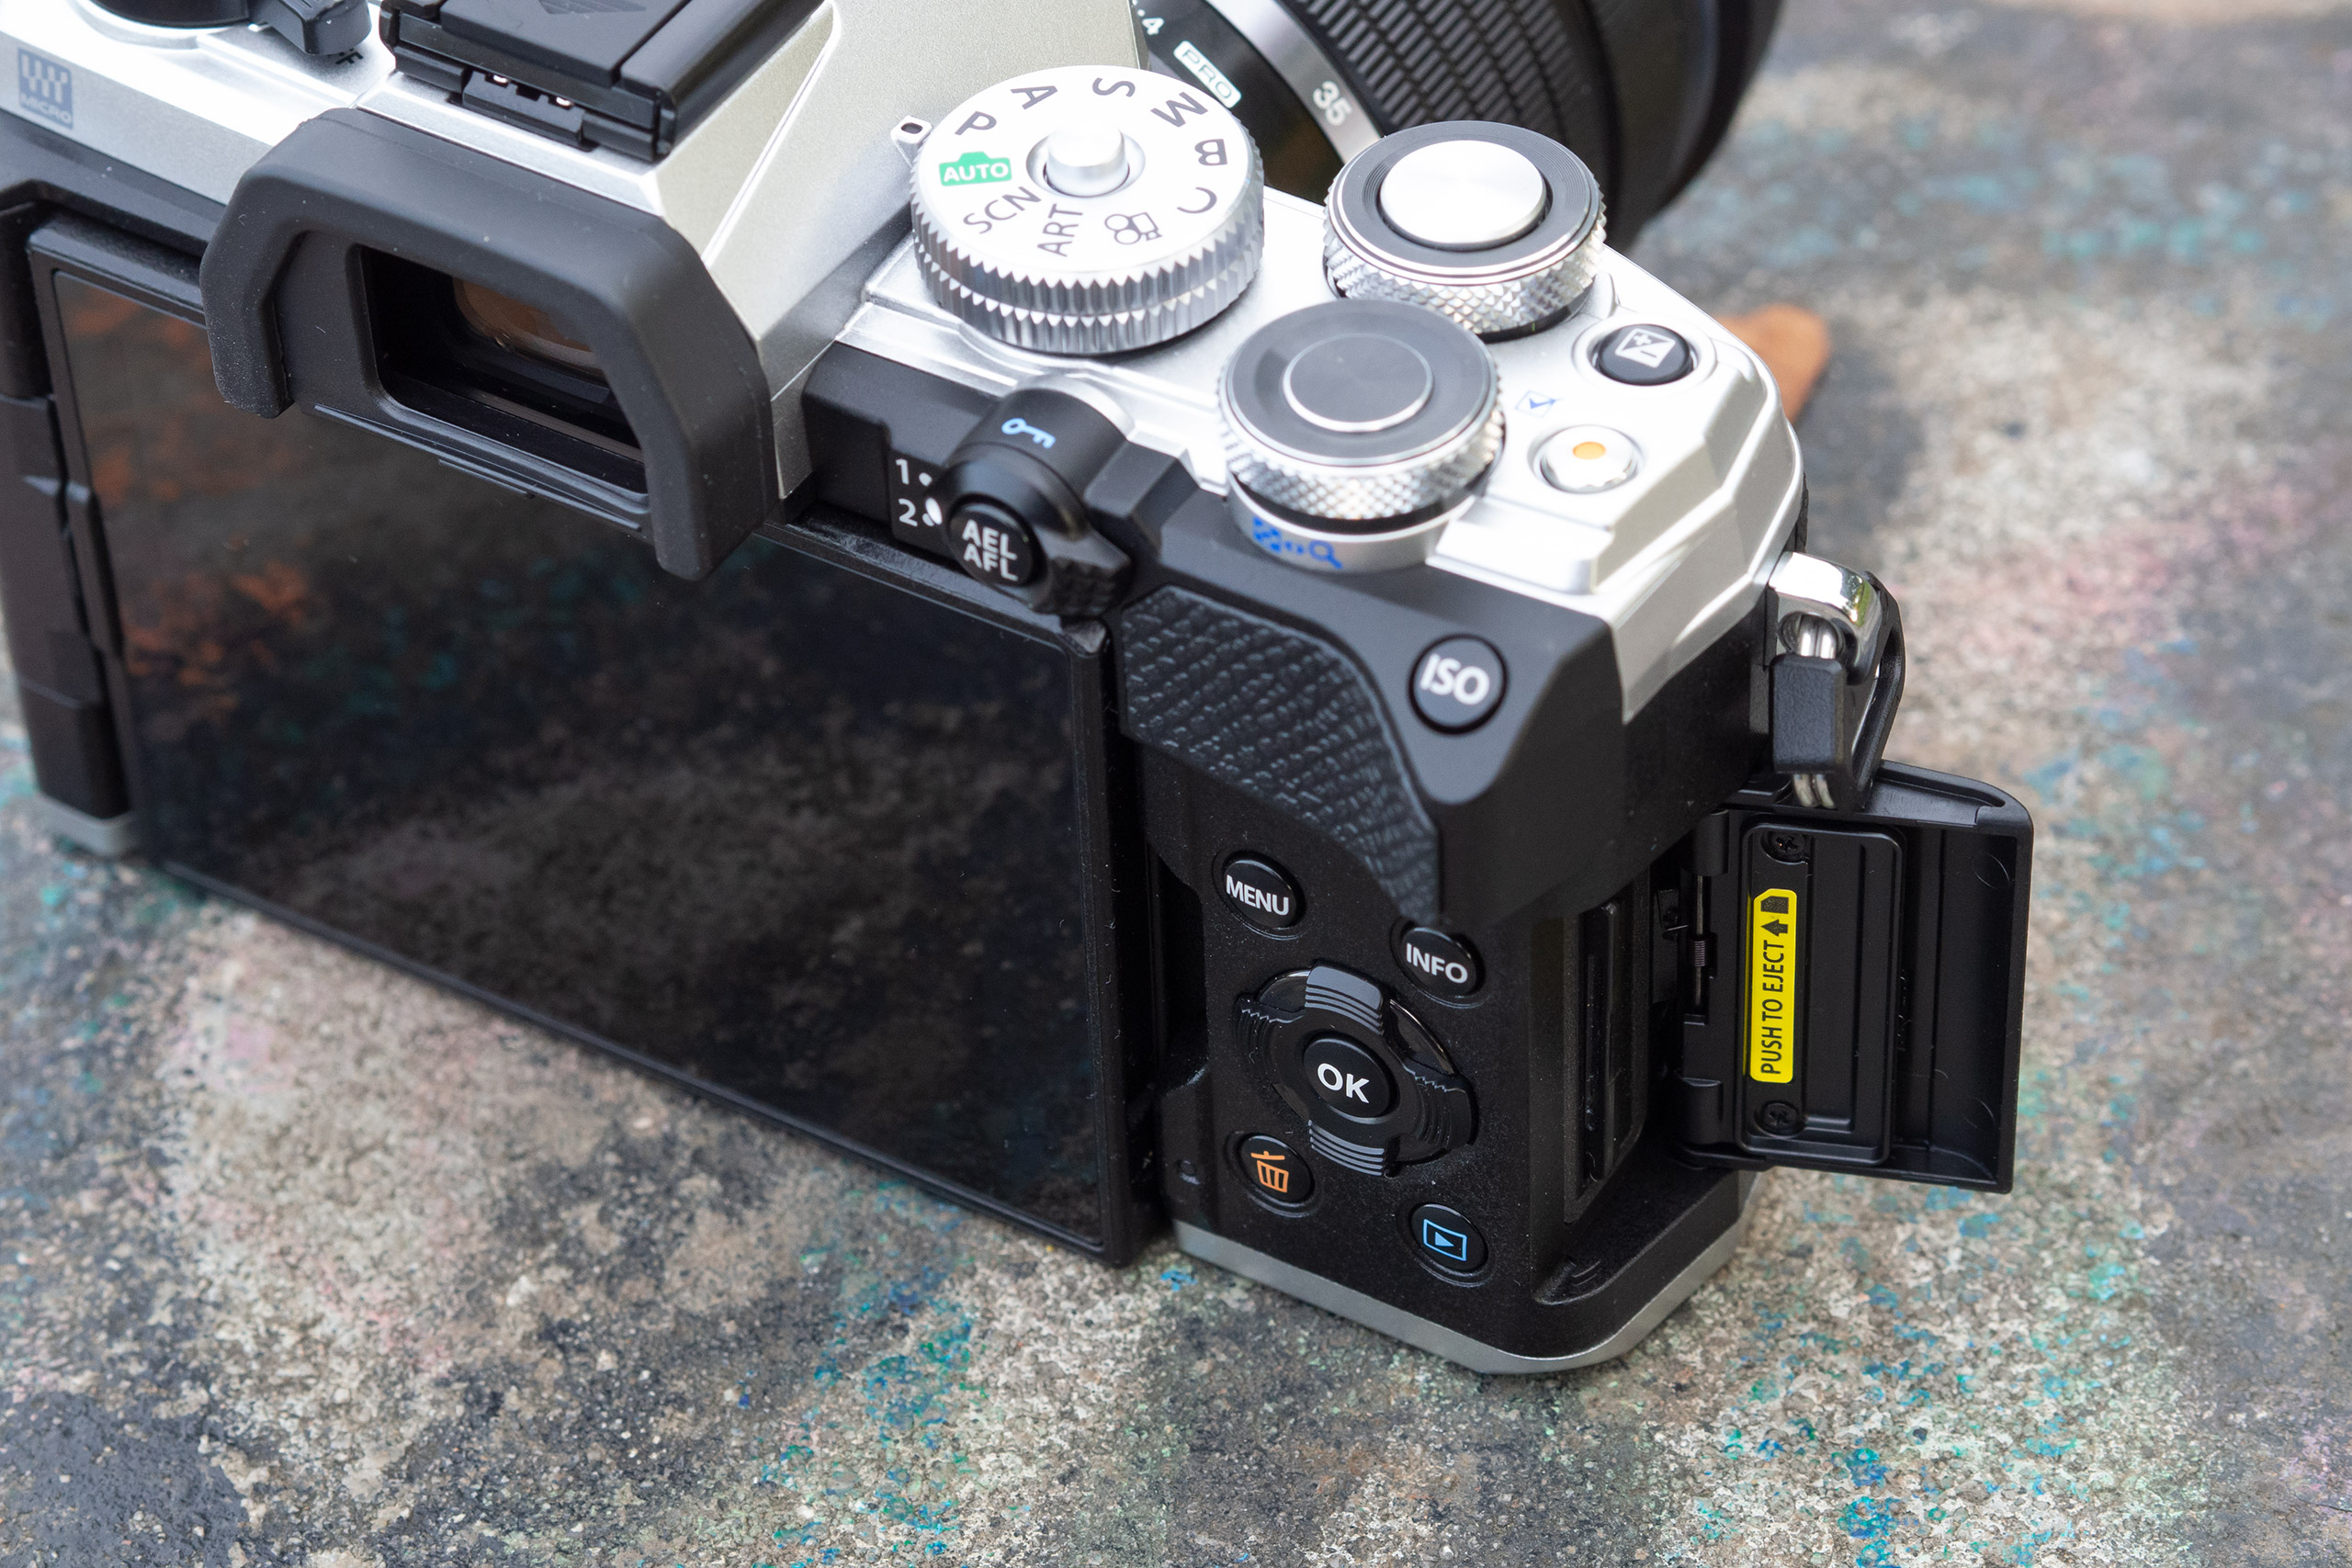 The OM System OM-5 includes side access to the memory card slot, and supports UHS-II SD cards, photo: Joshua Waller